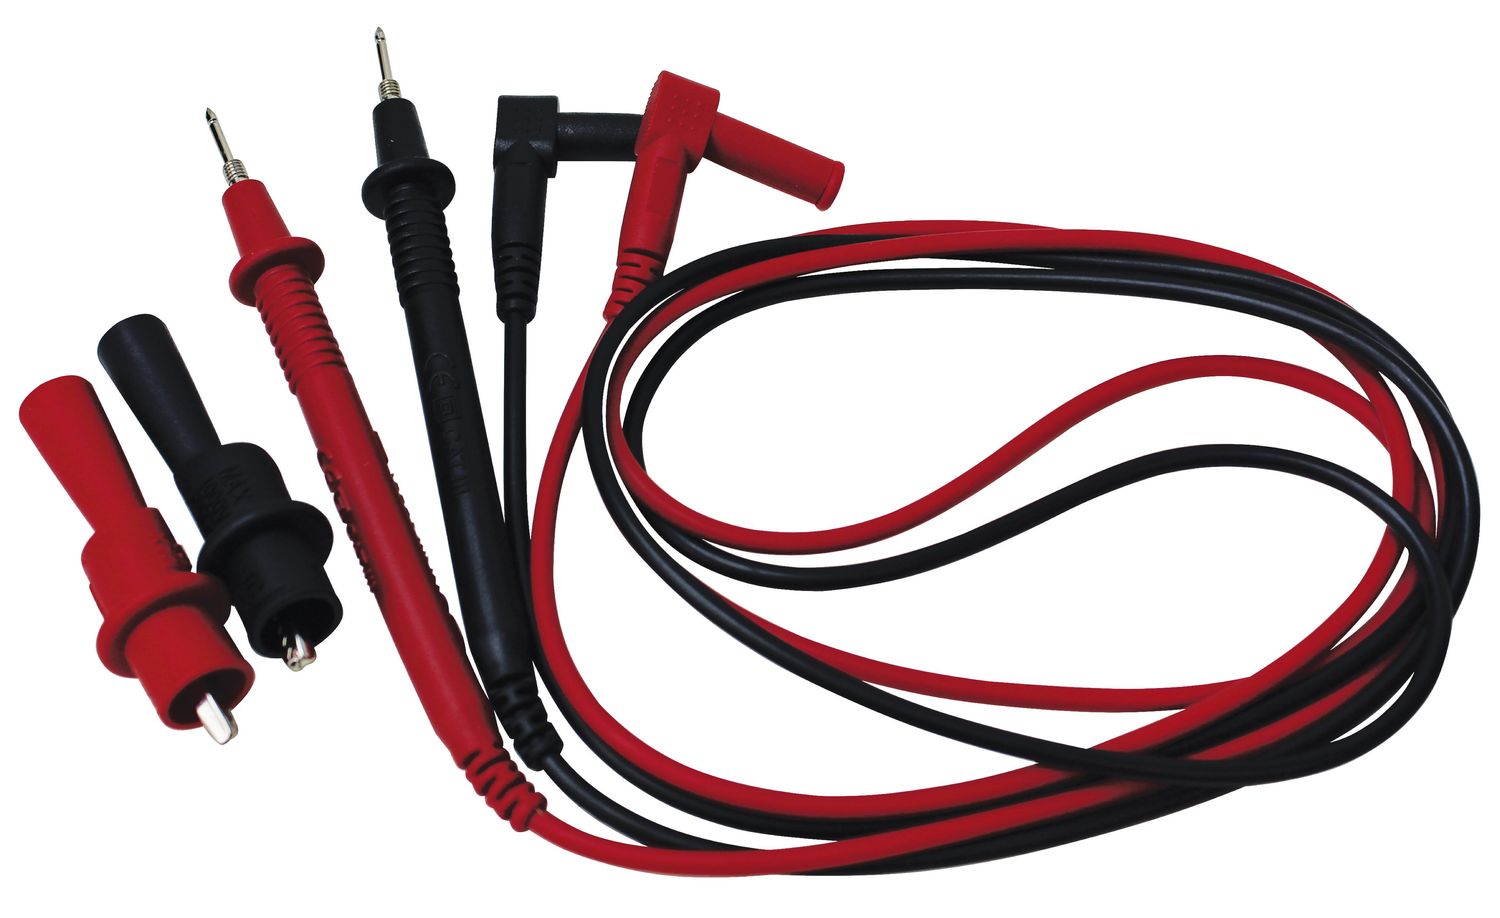 ES629 - Test Leads - Screw off Clips